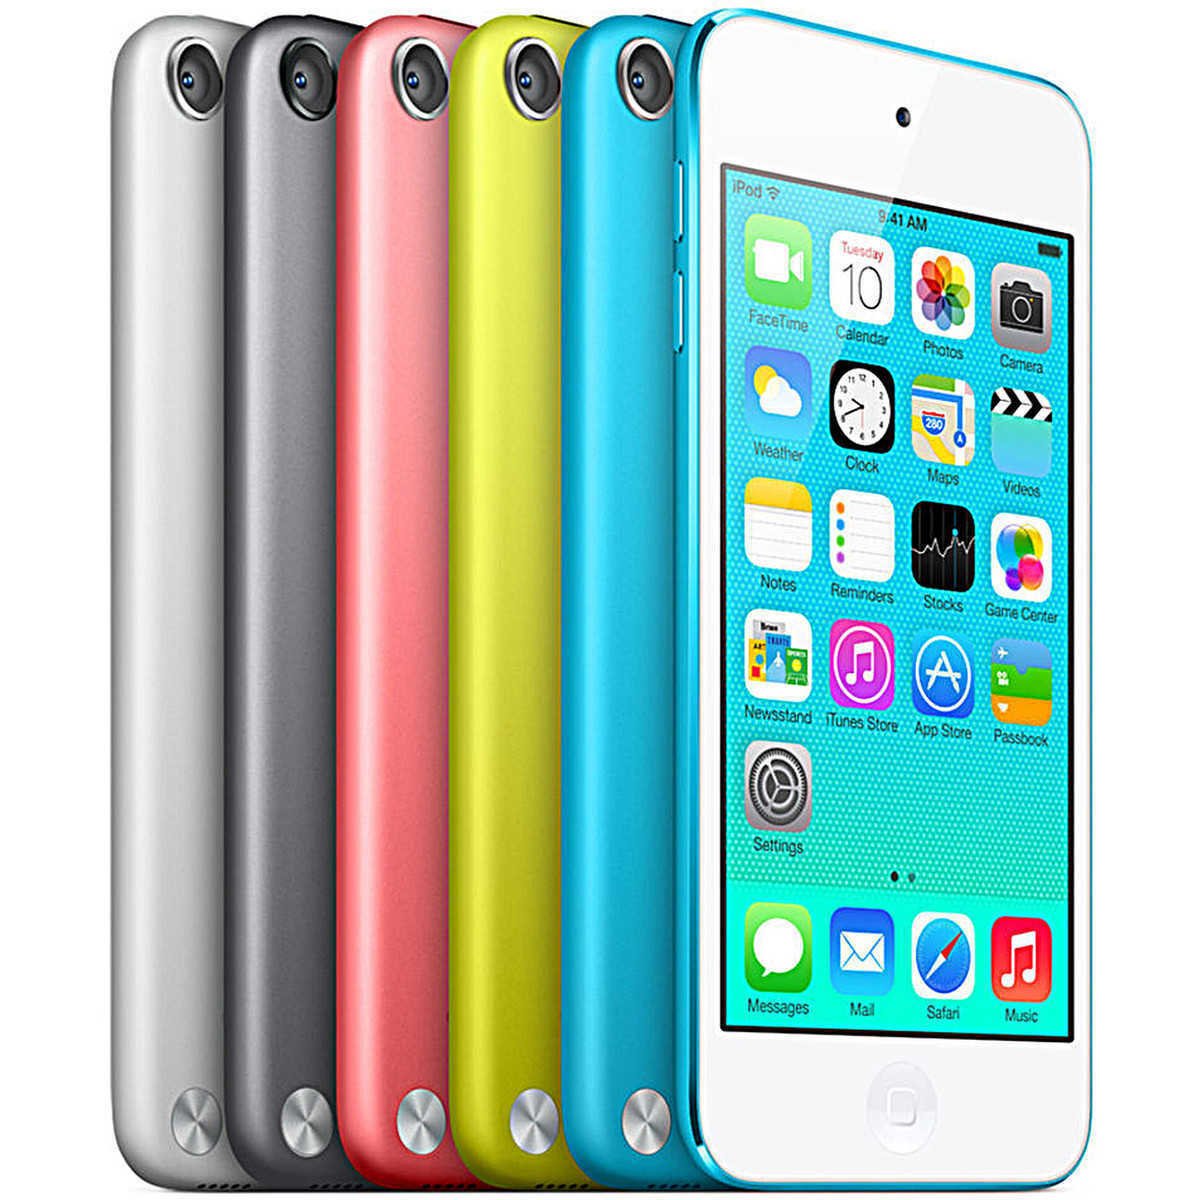 ipod touch blue 5th generation